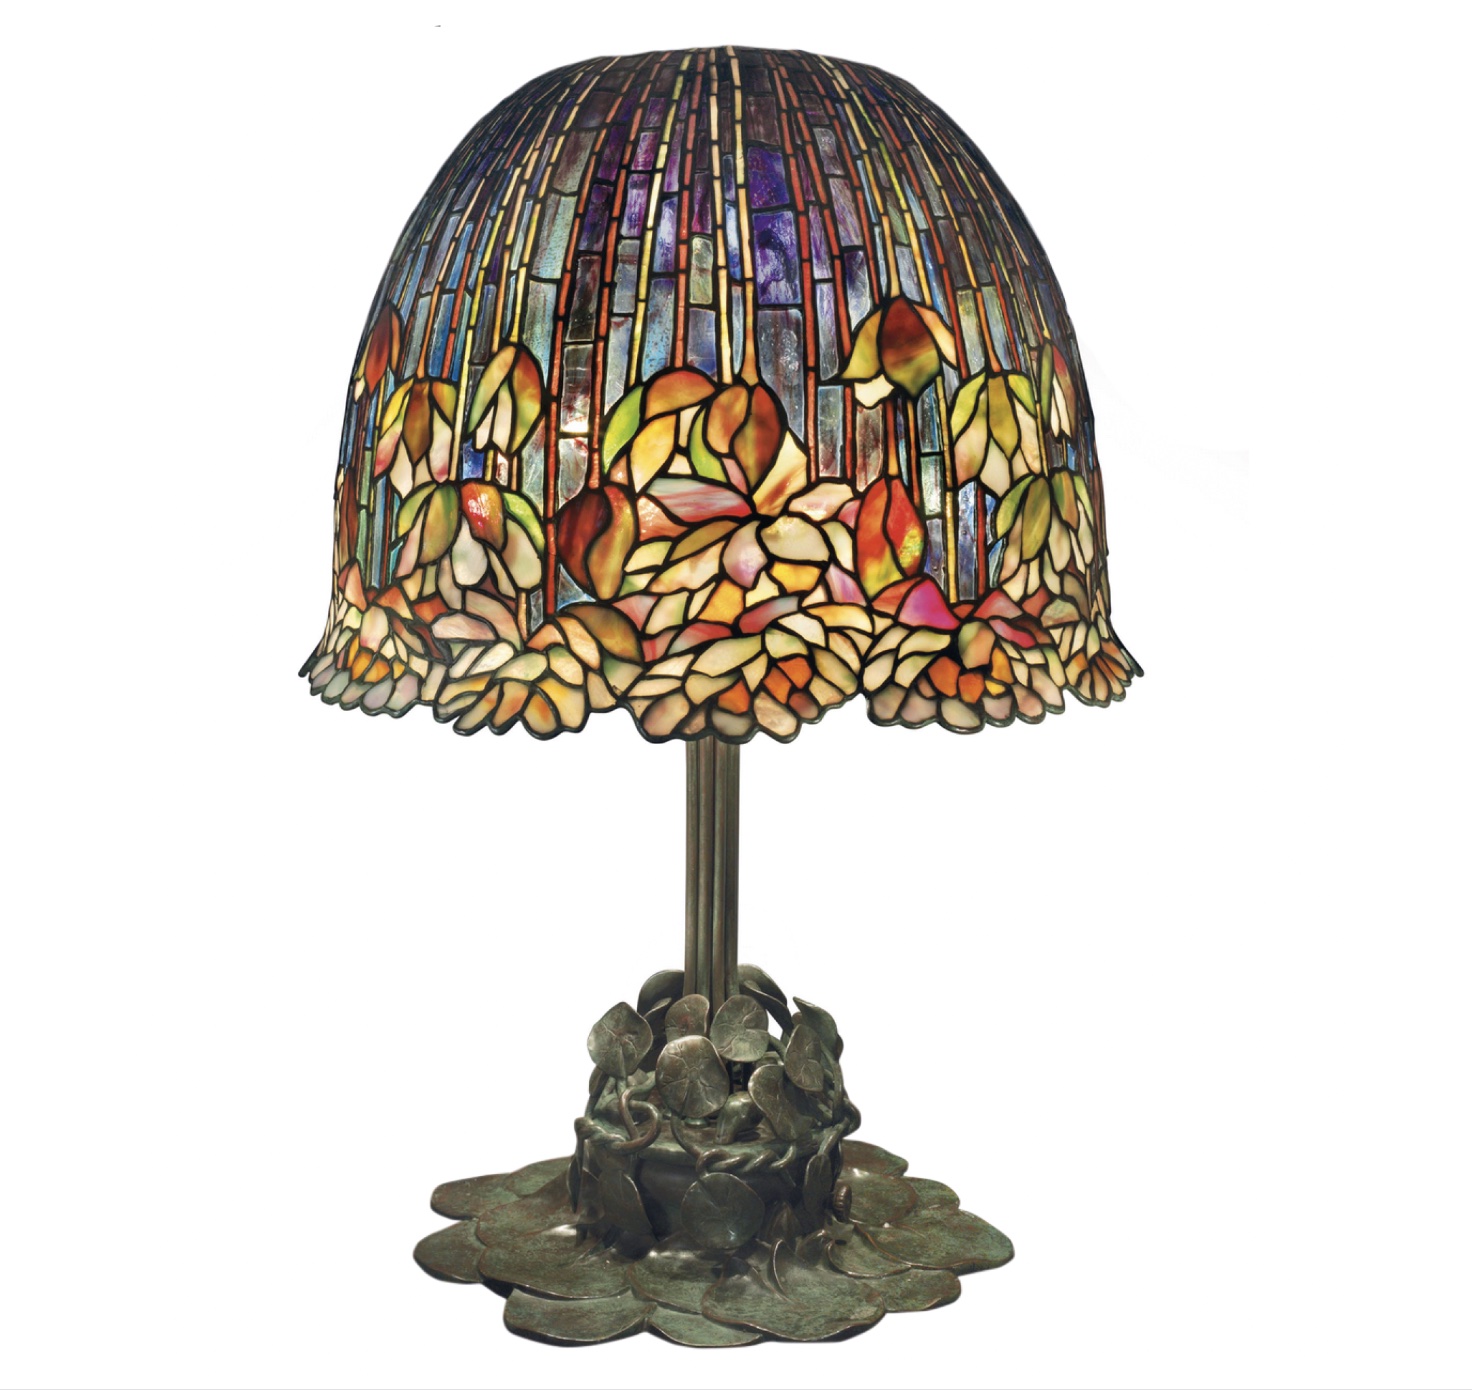 A rare antique Pond Lily lamp from Tiffany